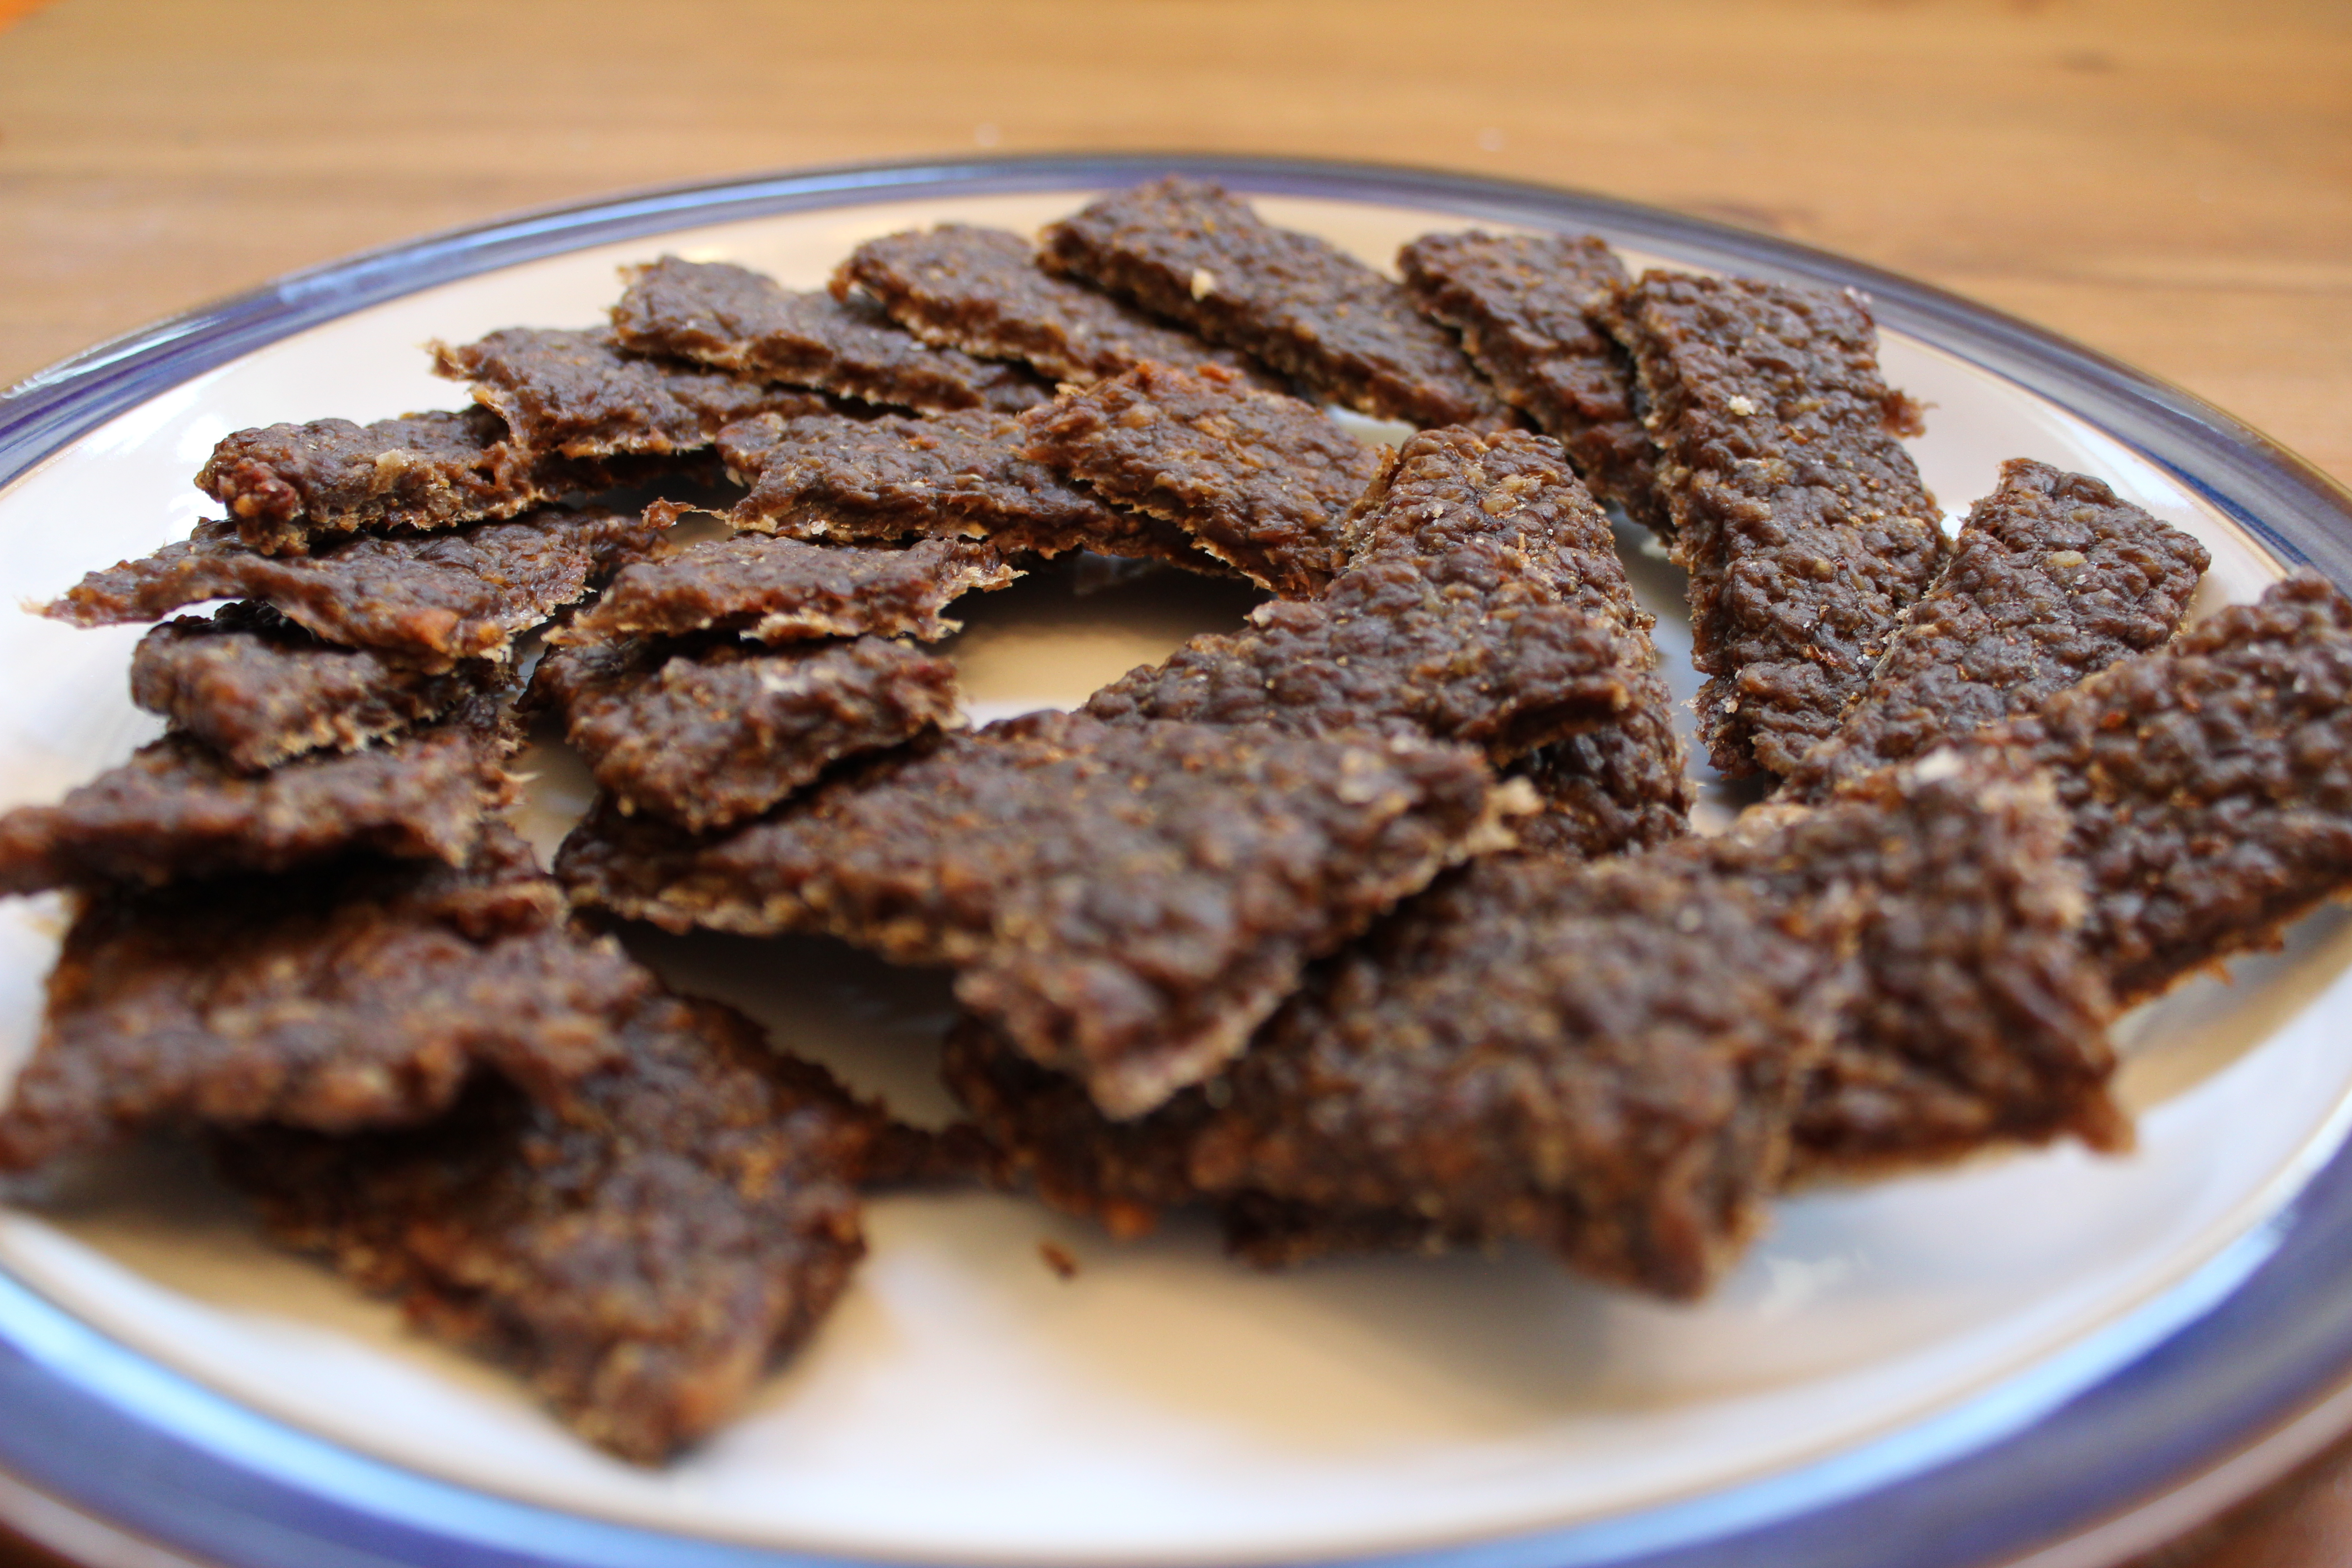 https://healthhomeandhappiness.com/wp-content/uploads/2015/05/jerky-from-ground-beef.jpg